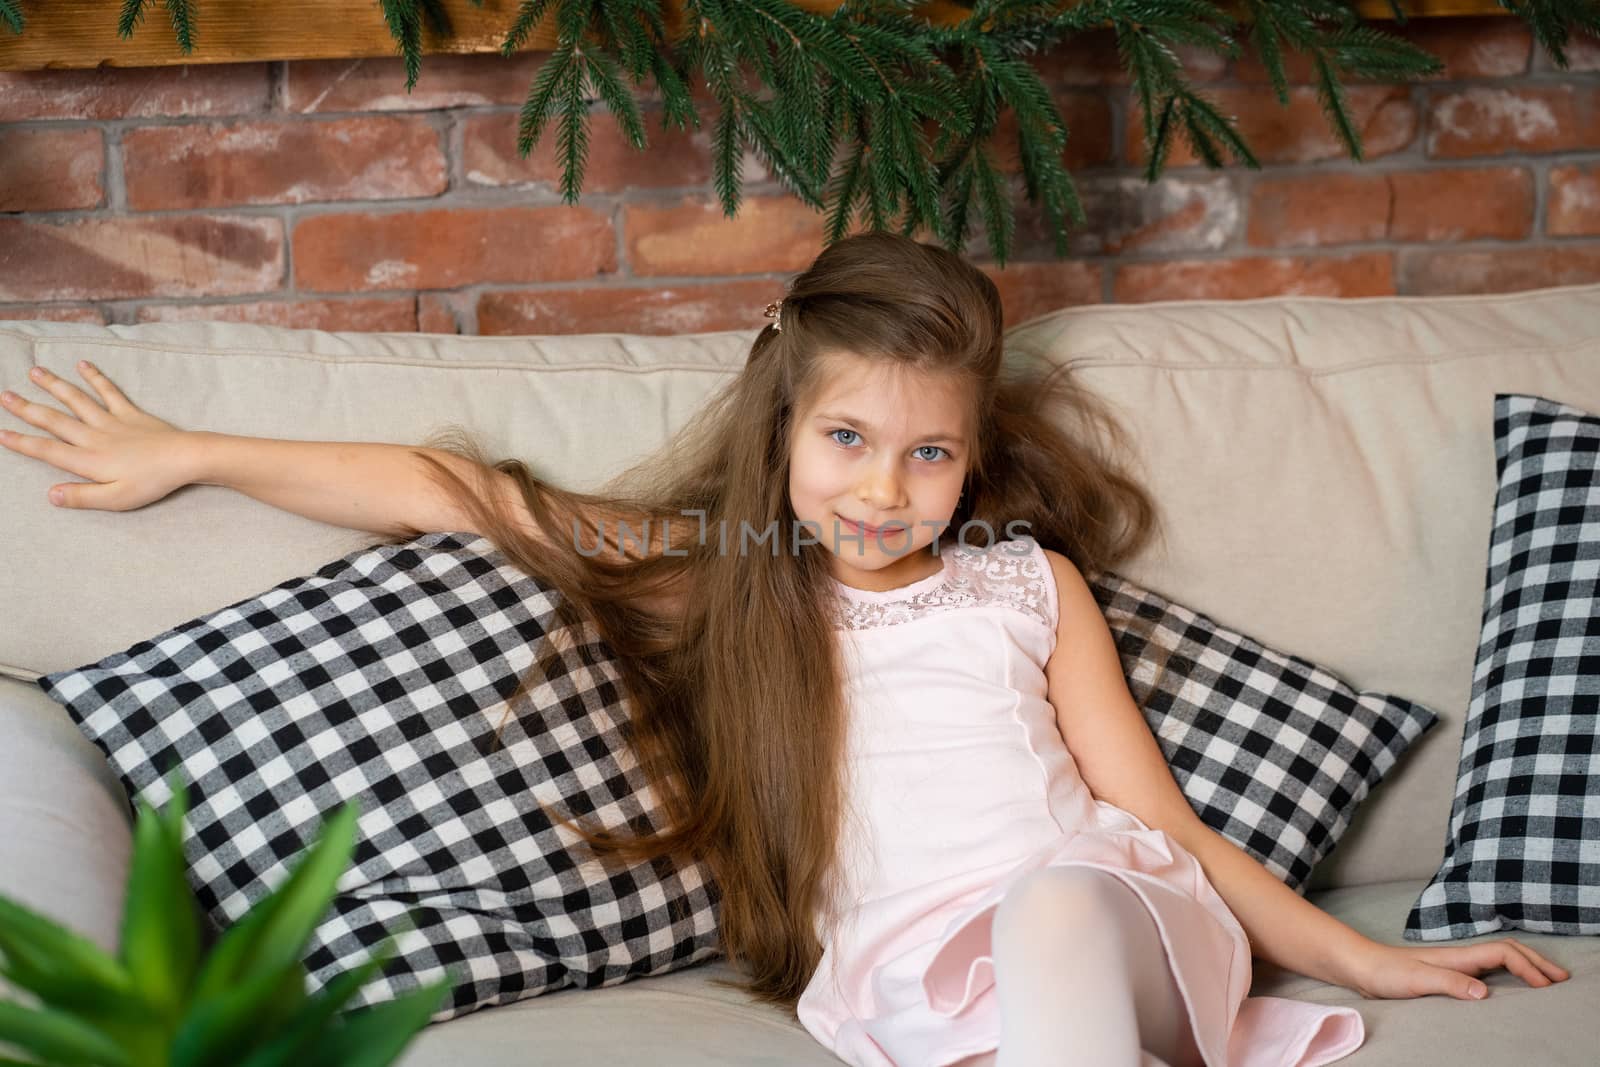 A little girl is sitting on a cozy sofa with checkered pillows.